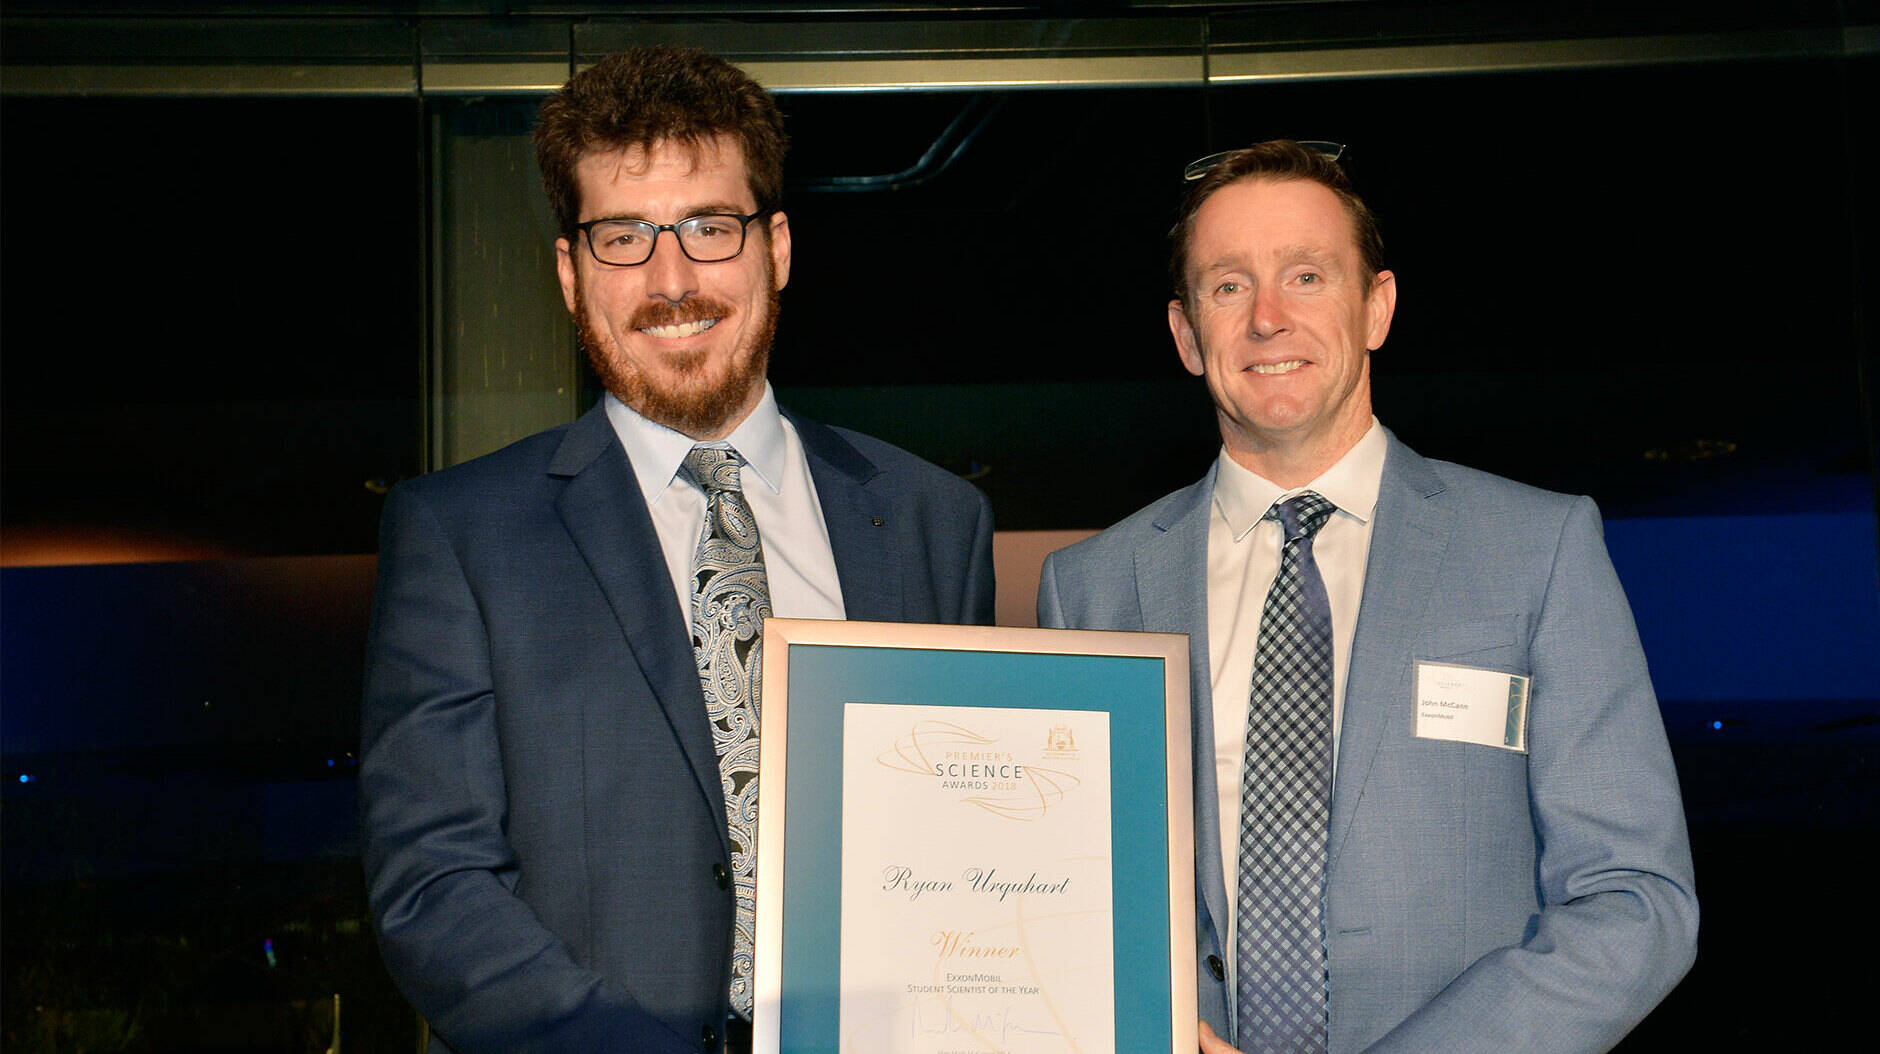 Image Photo — ExxonMobil's Joint Interest Manager, John McCann presents the Student Scientist of the Year 2018 award to joint winner Ryan Urquhart.